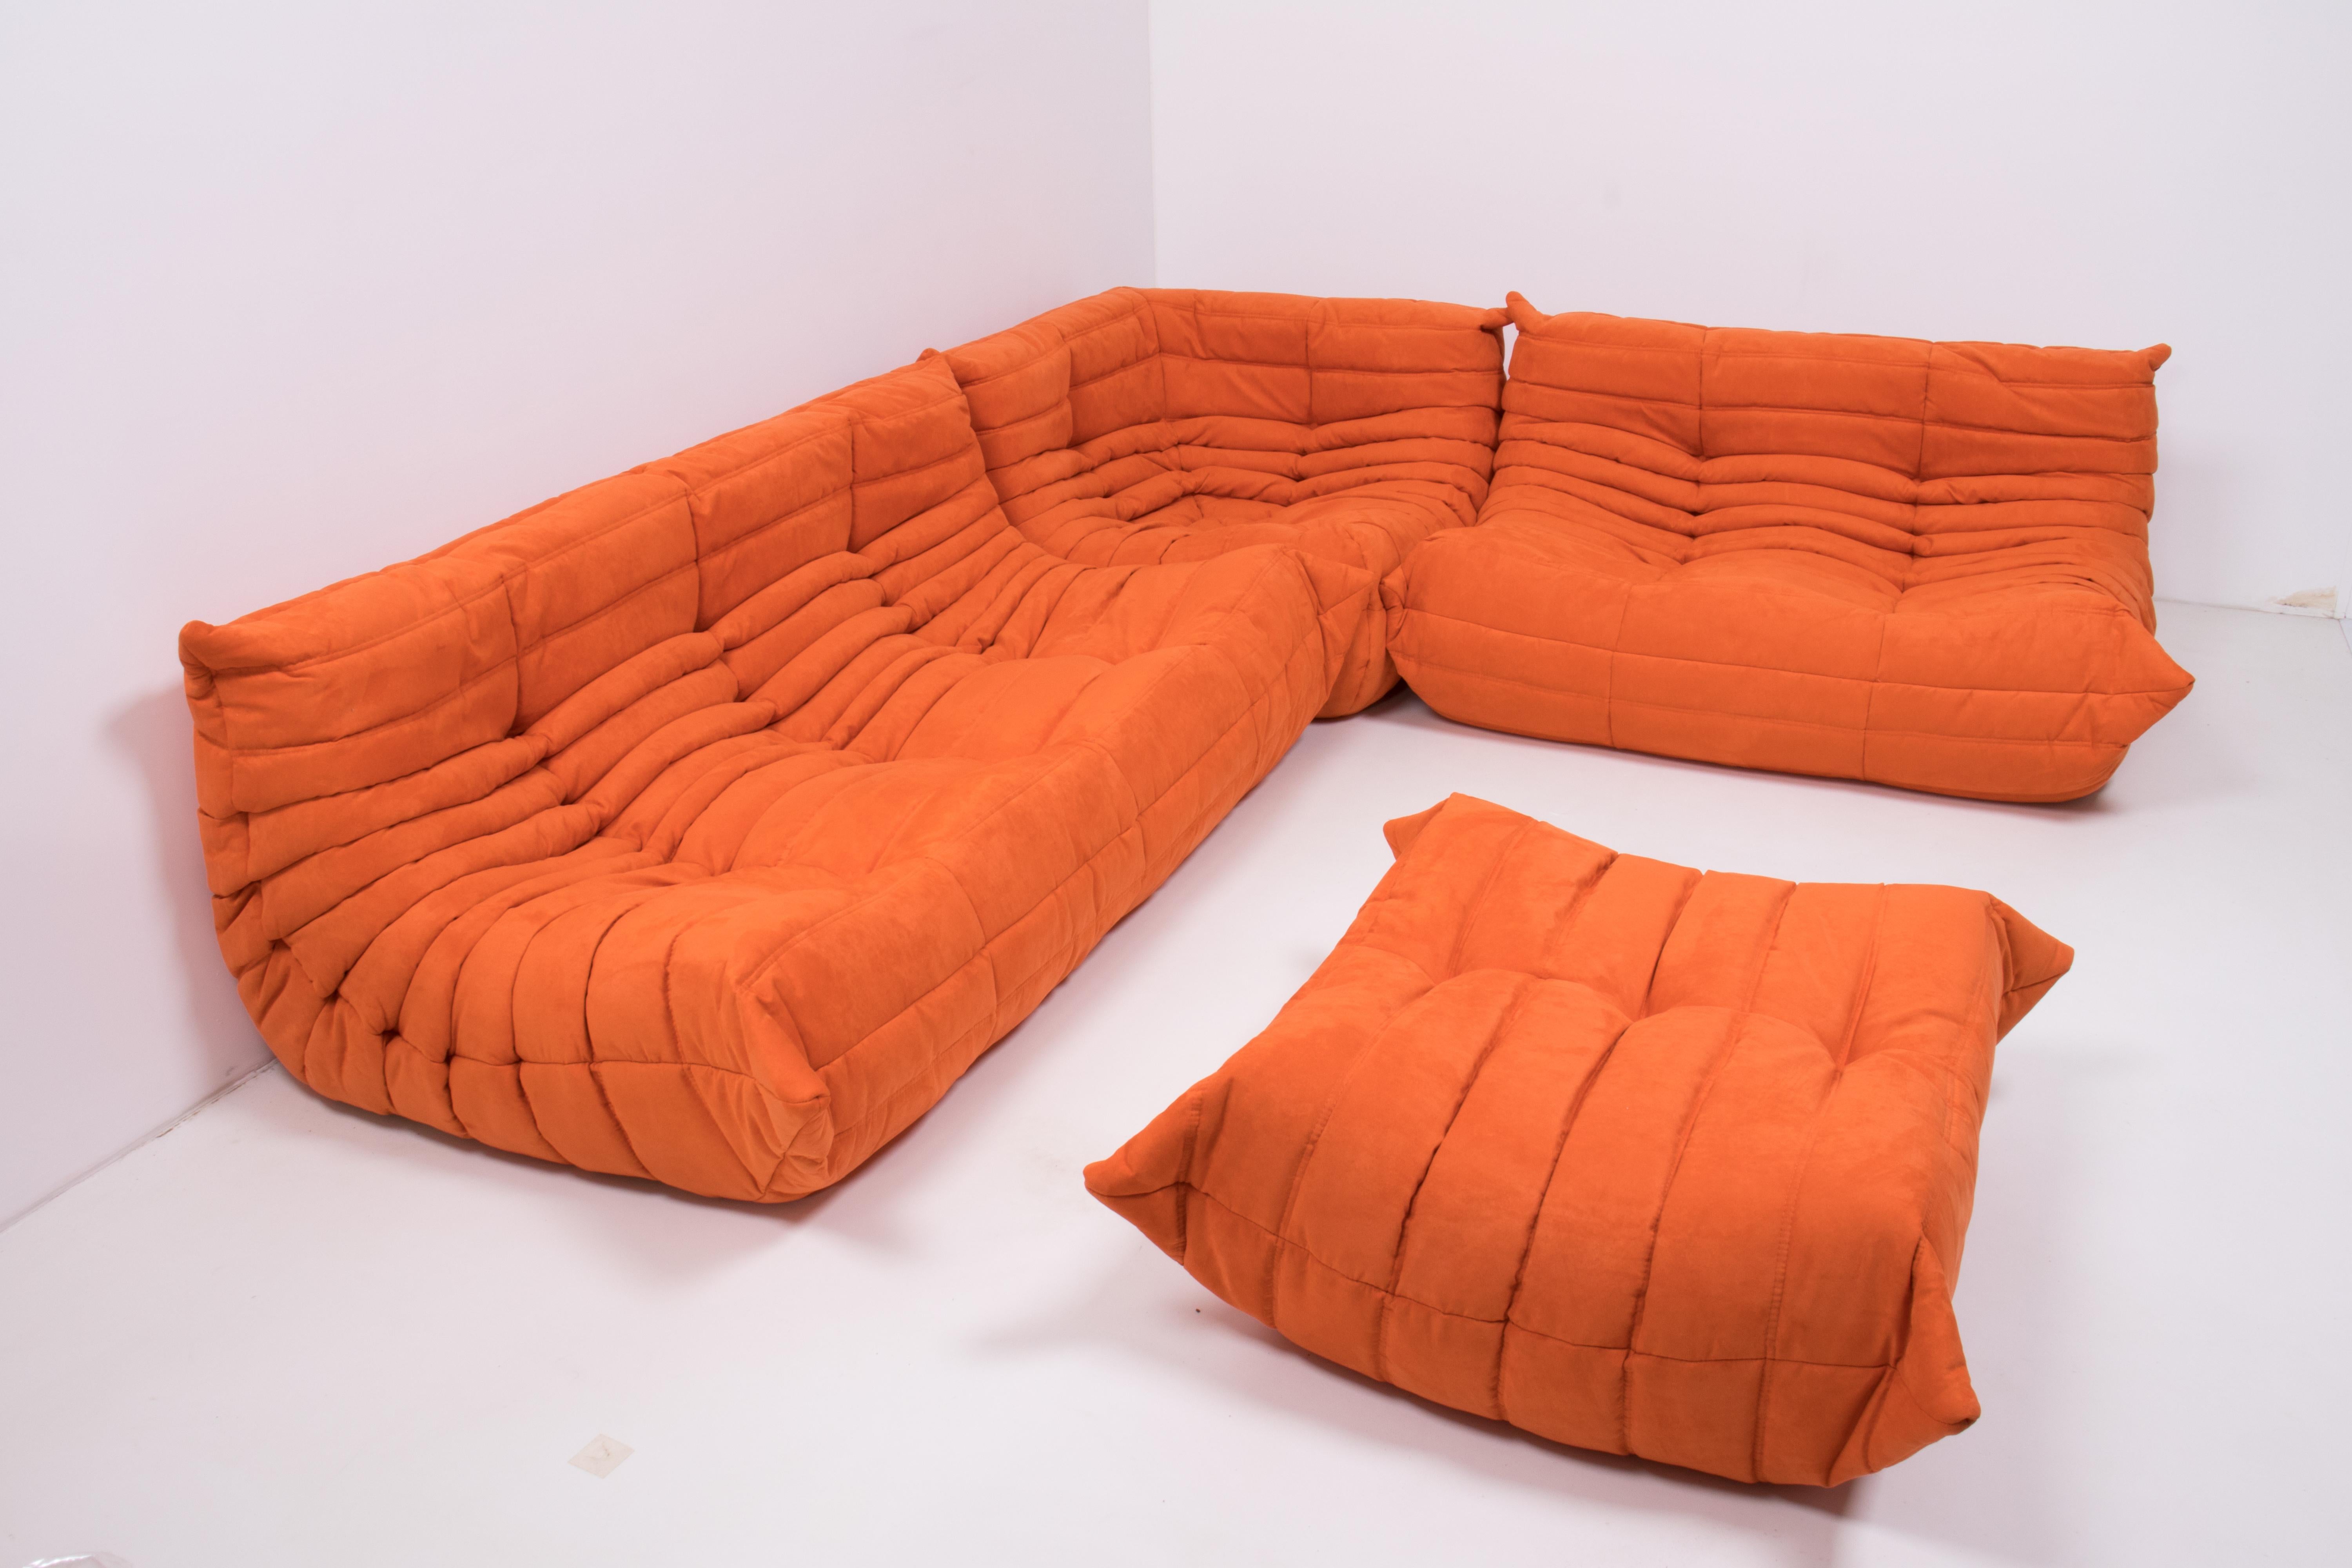 The iconic Togo orange sofa set, originally designed by Michel Ducaroy for Ligne Roset in 1973, has become a design mid century classic.

The sofas have been newly reupholstered in a soft bright orange coloured fabric. Made completely from foam,